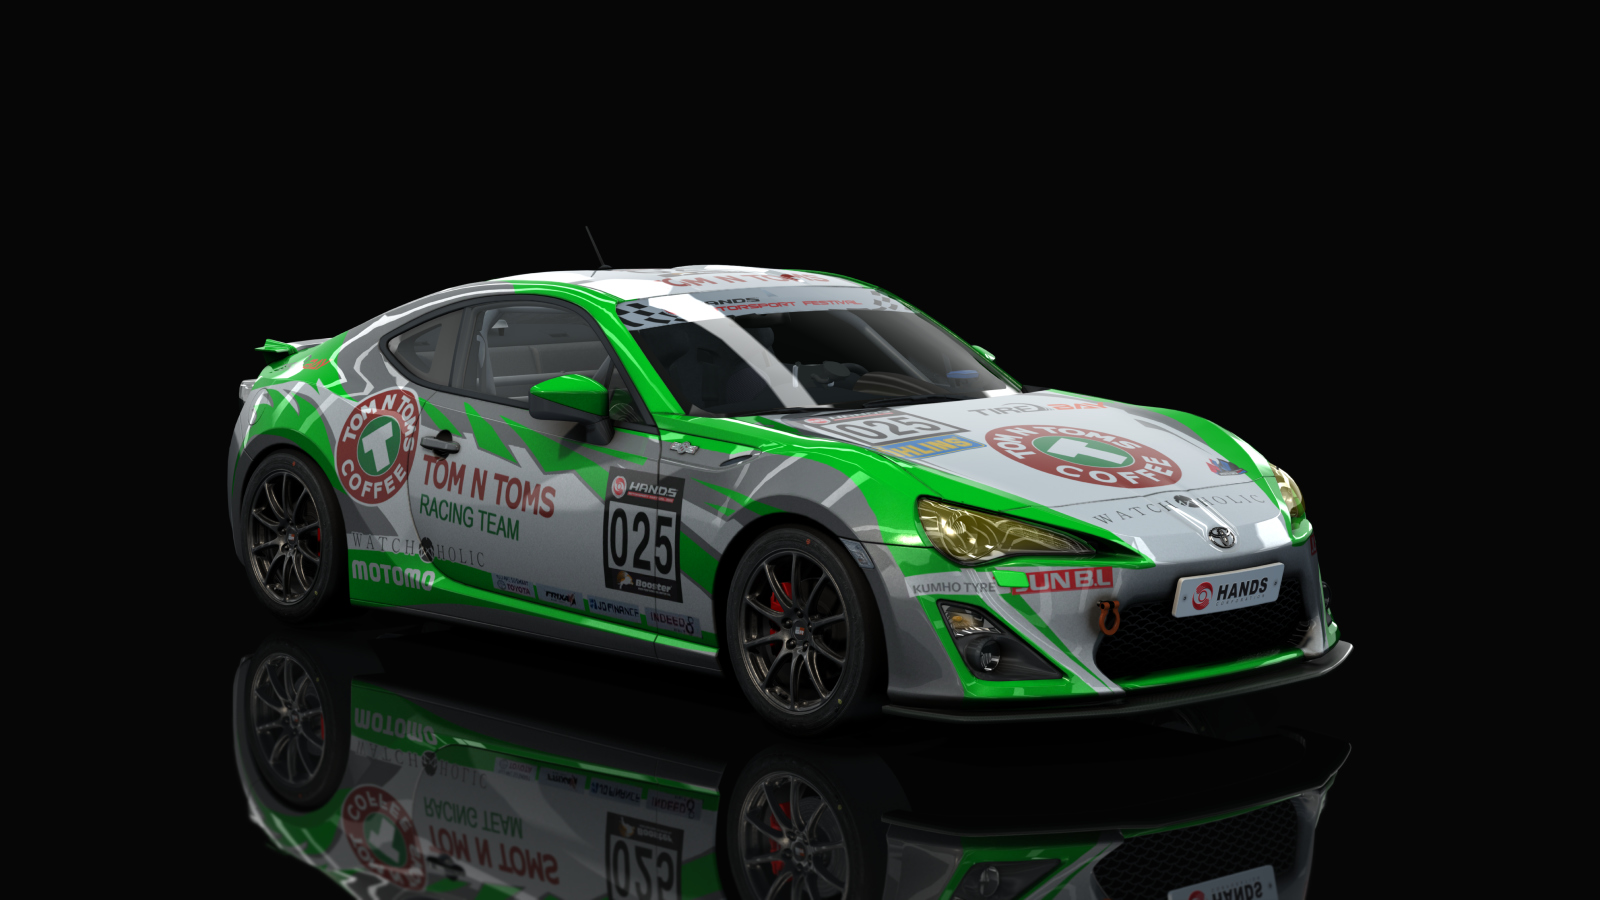 Toyota GT86 Cup, skin 025_TOMnTOMS